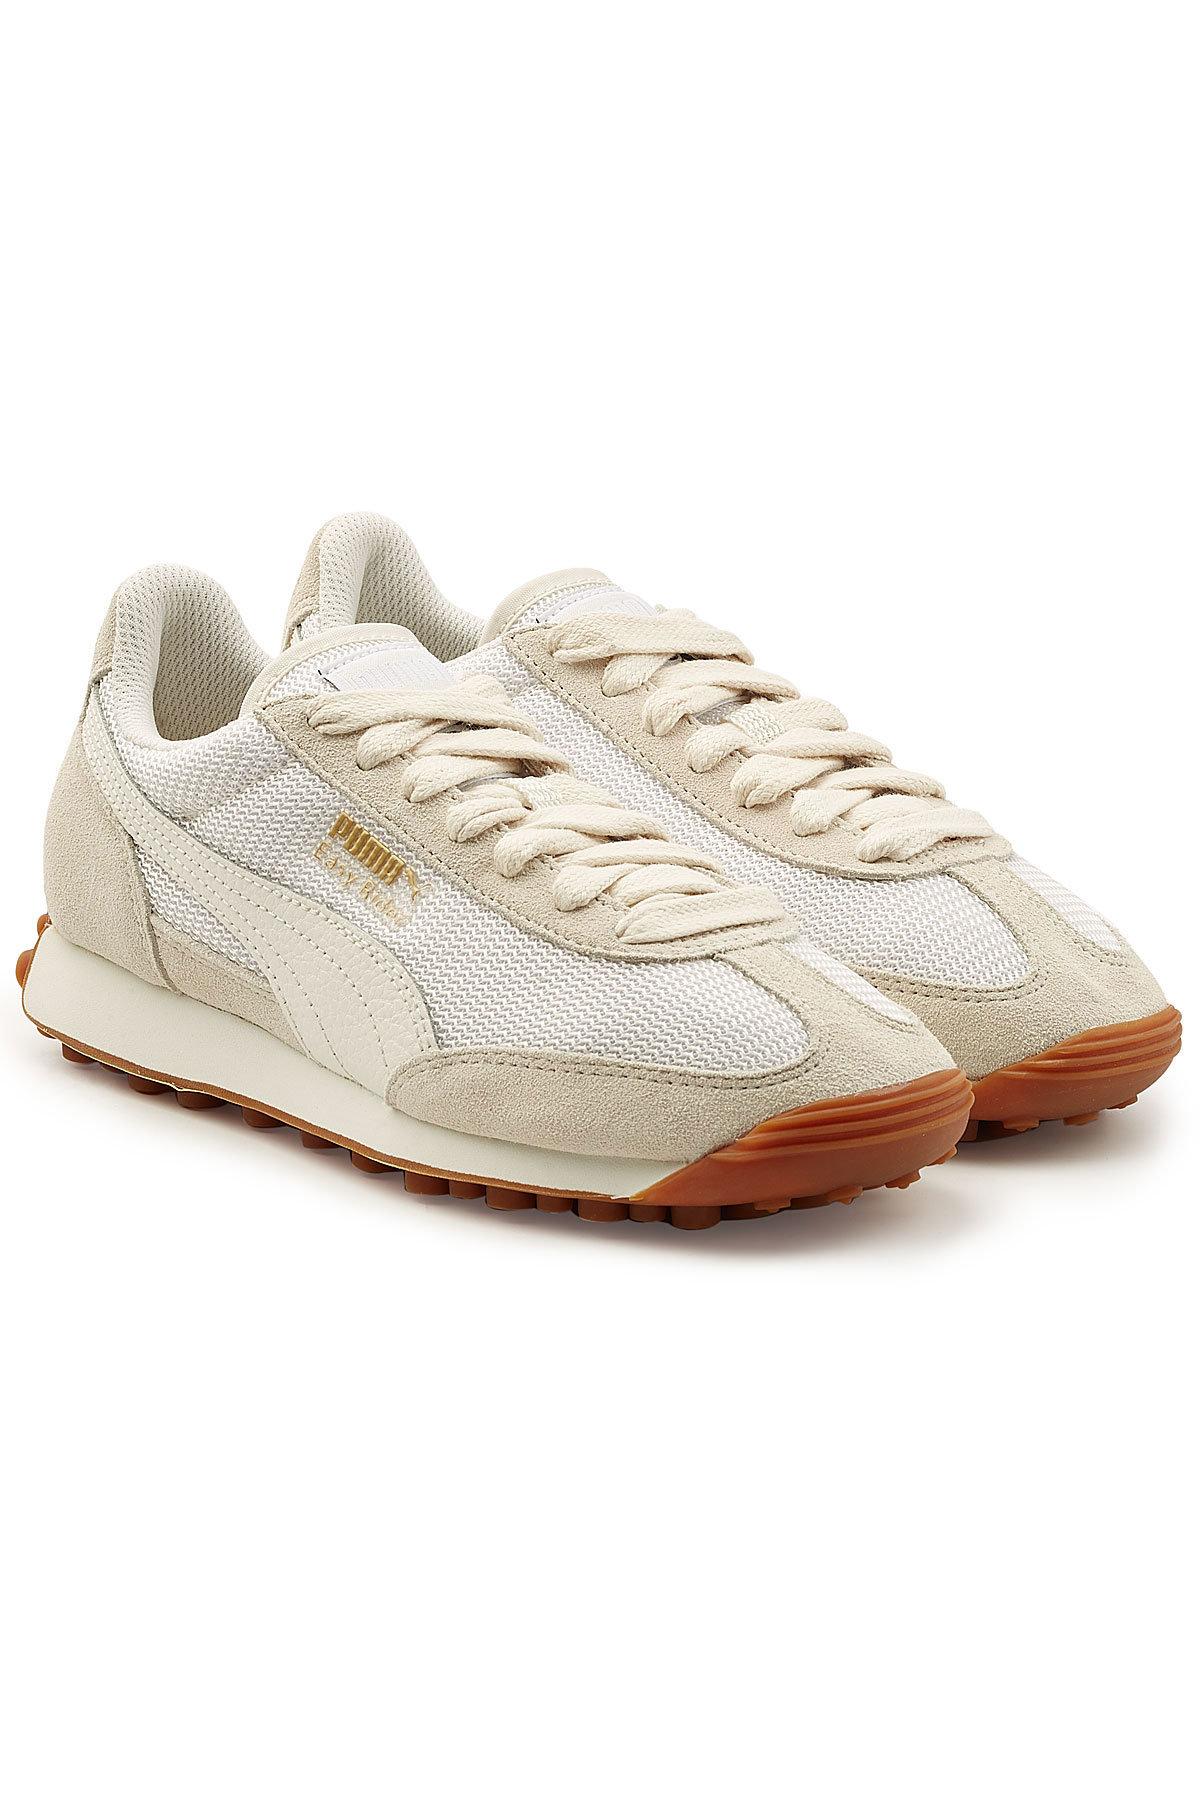 Puma Easy Rider Sneakers With Leather 